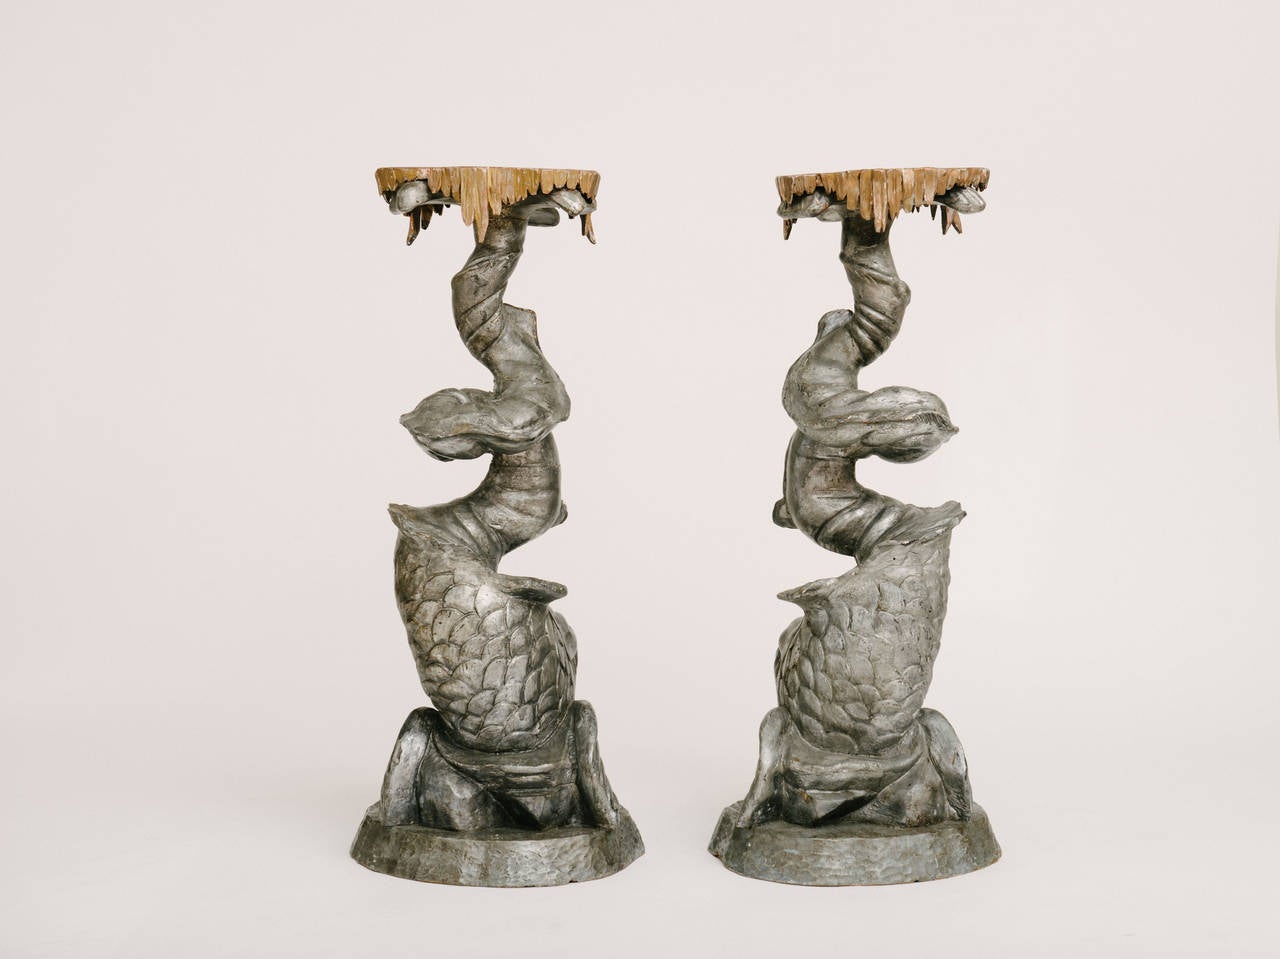 Neoclassical Revival Pair of Venetian Grotto Dolphin Pedestals